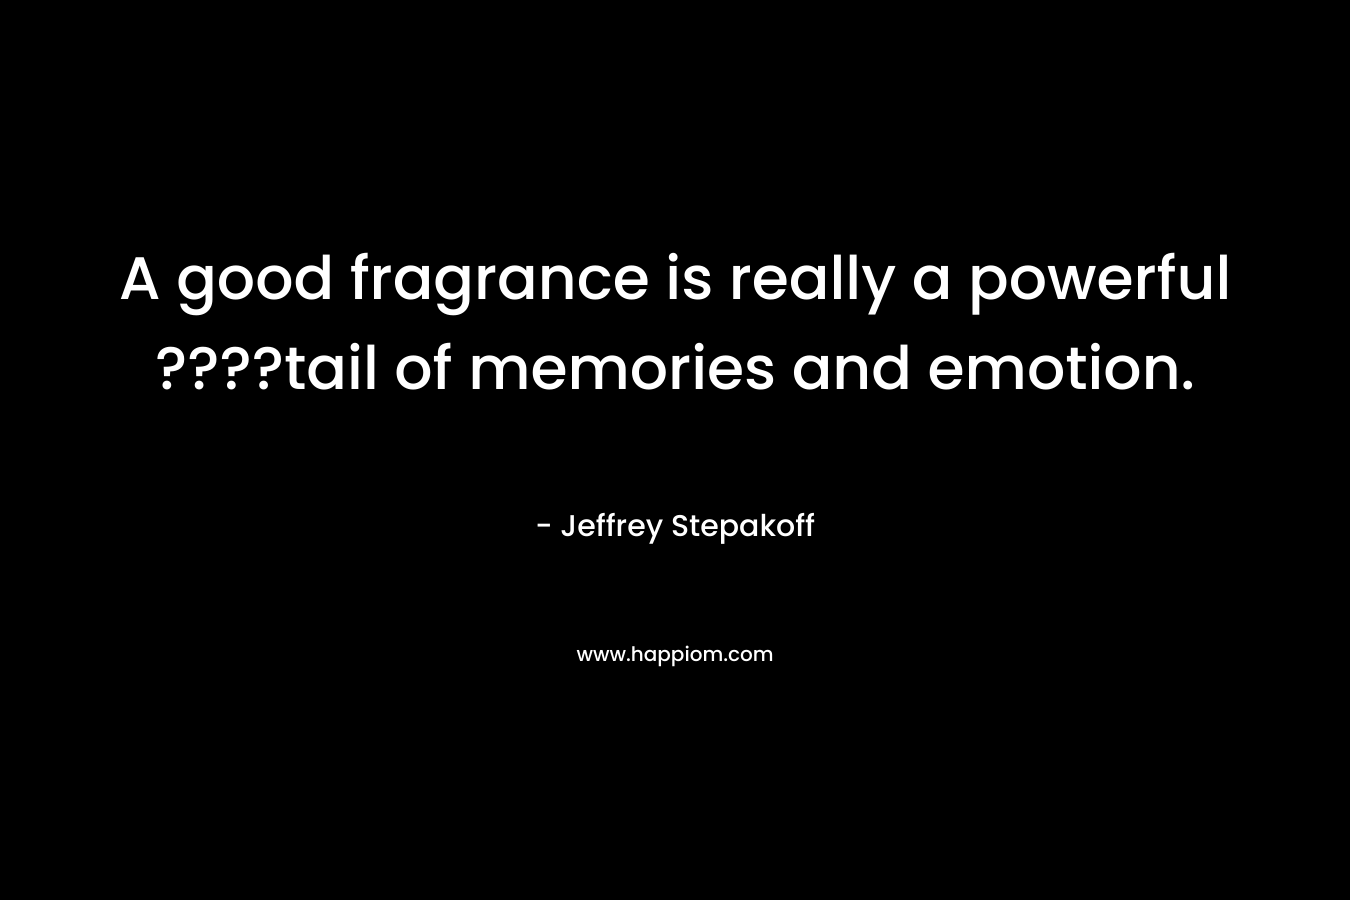 A good fragrance is really a powerful ????tail of memories and emotion. – Jeffrey Stepakoff